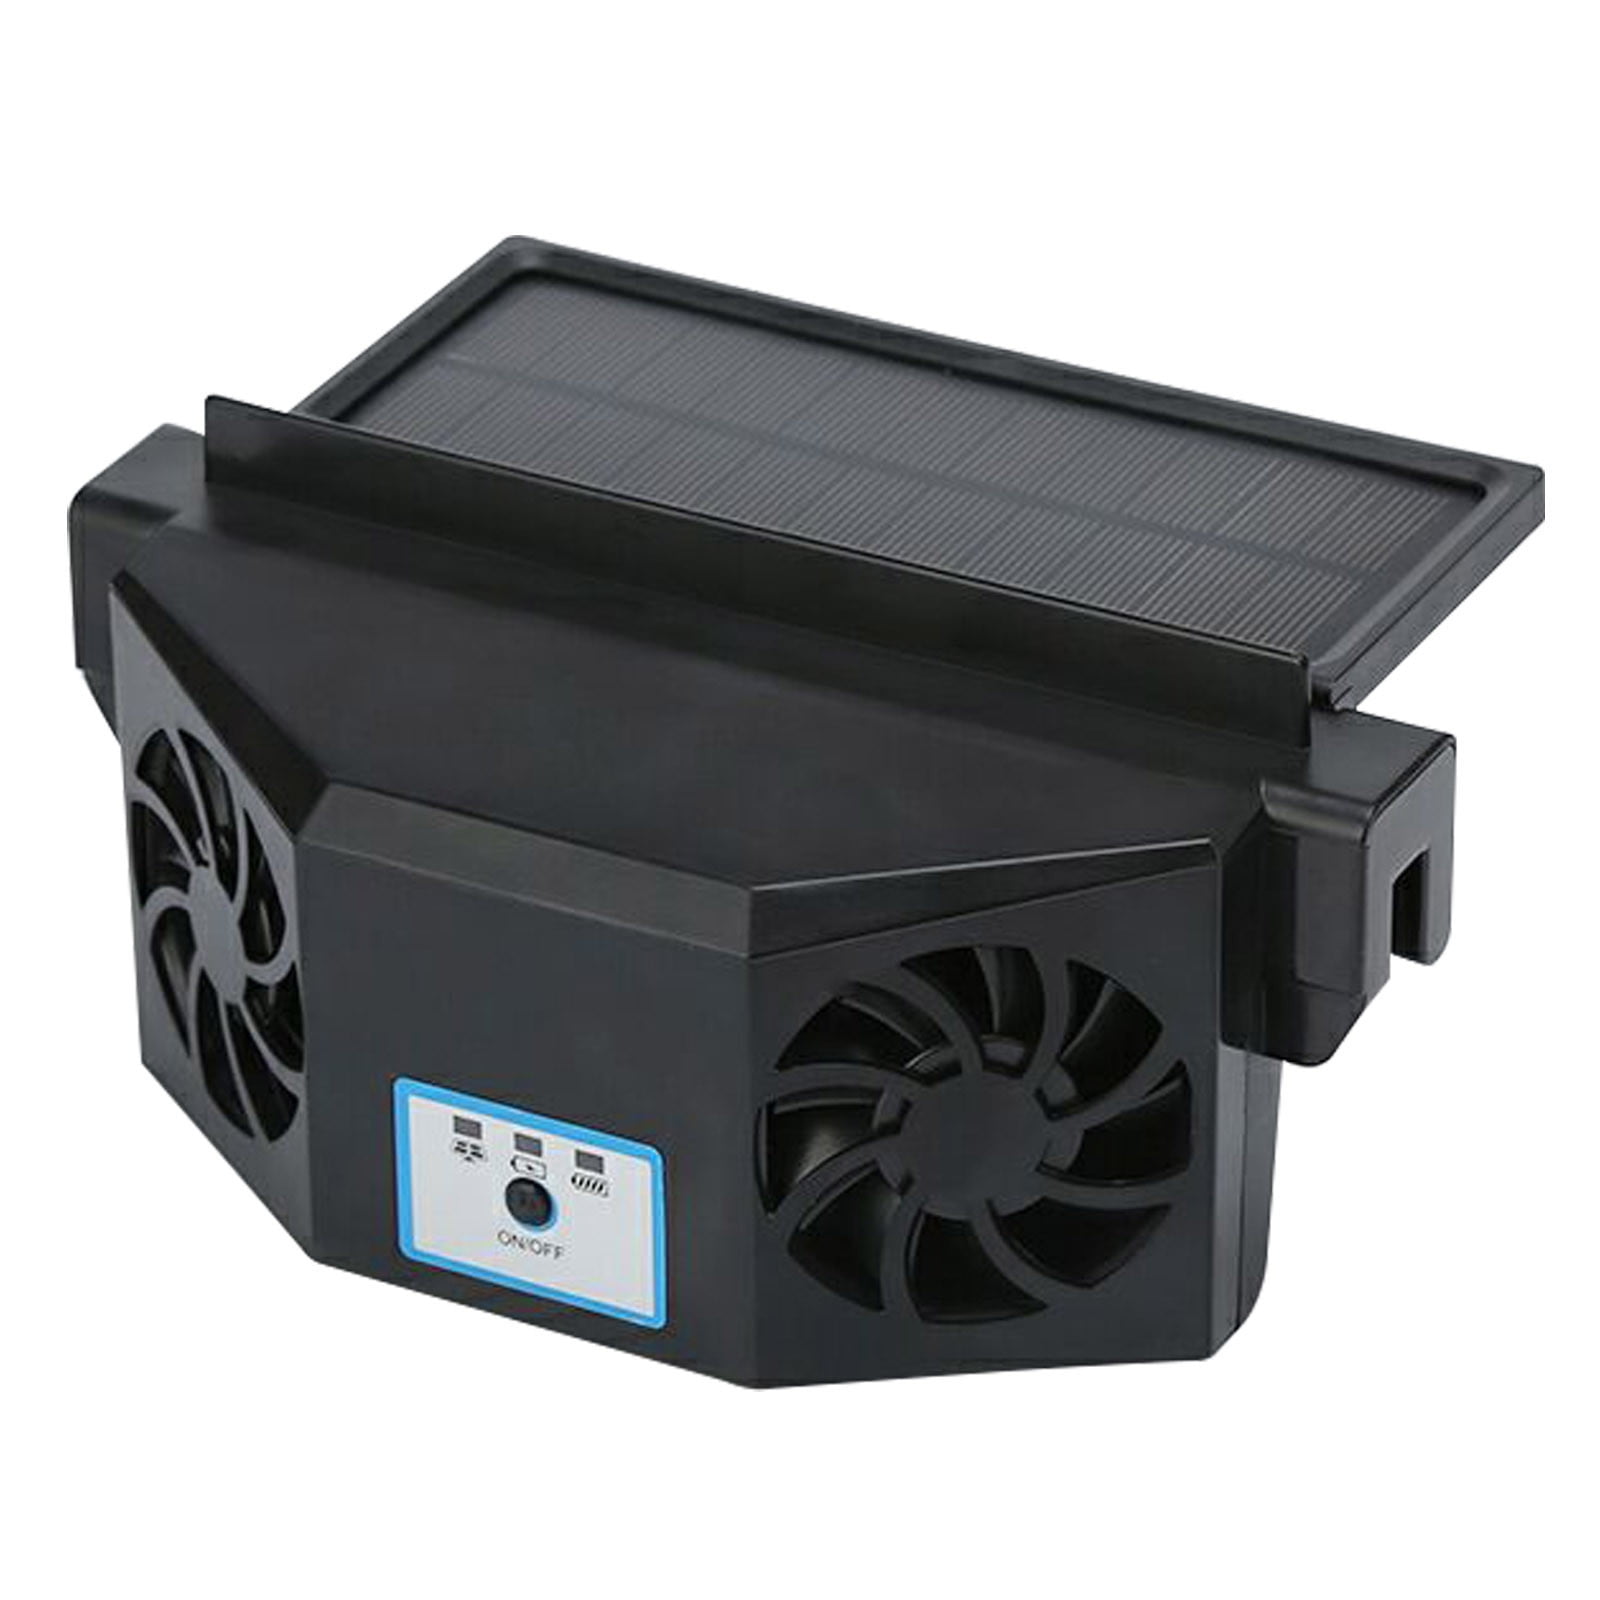 Solar Powered Car Window Fan Auto Ventilator Cooler Air Vehicle Radiator  Vent With Rubber Stripping From Ladymm, $4.99